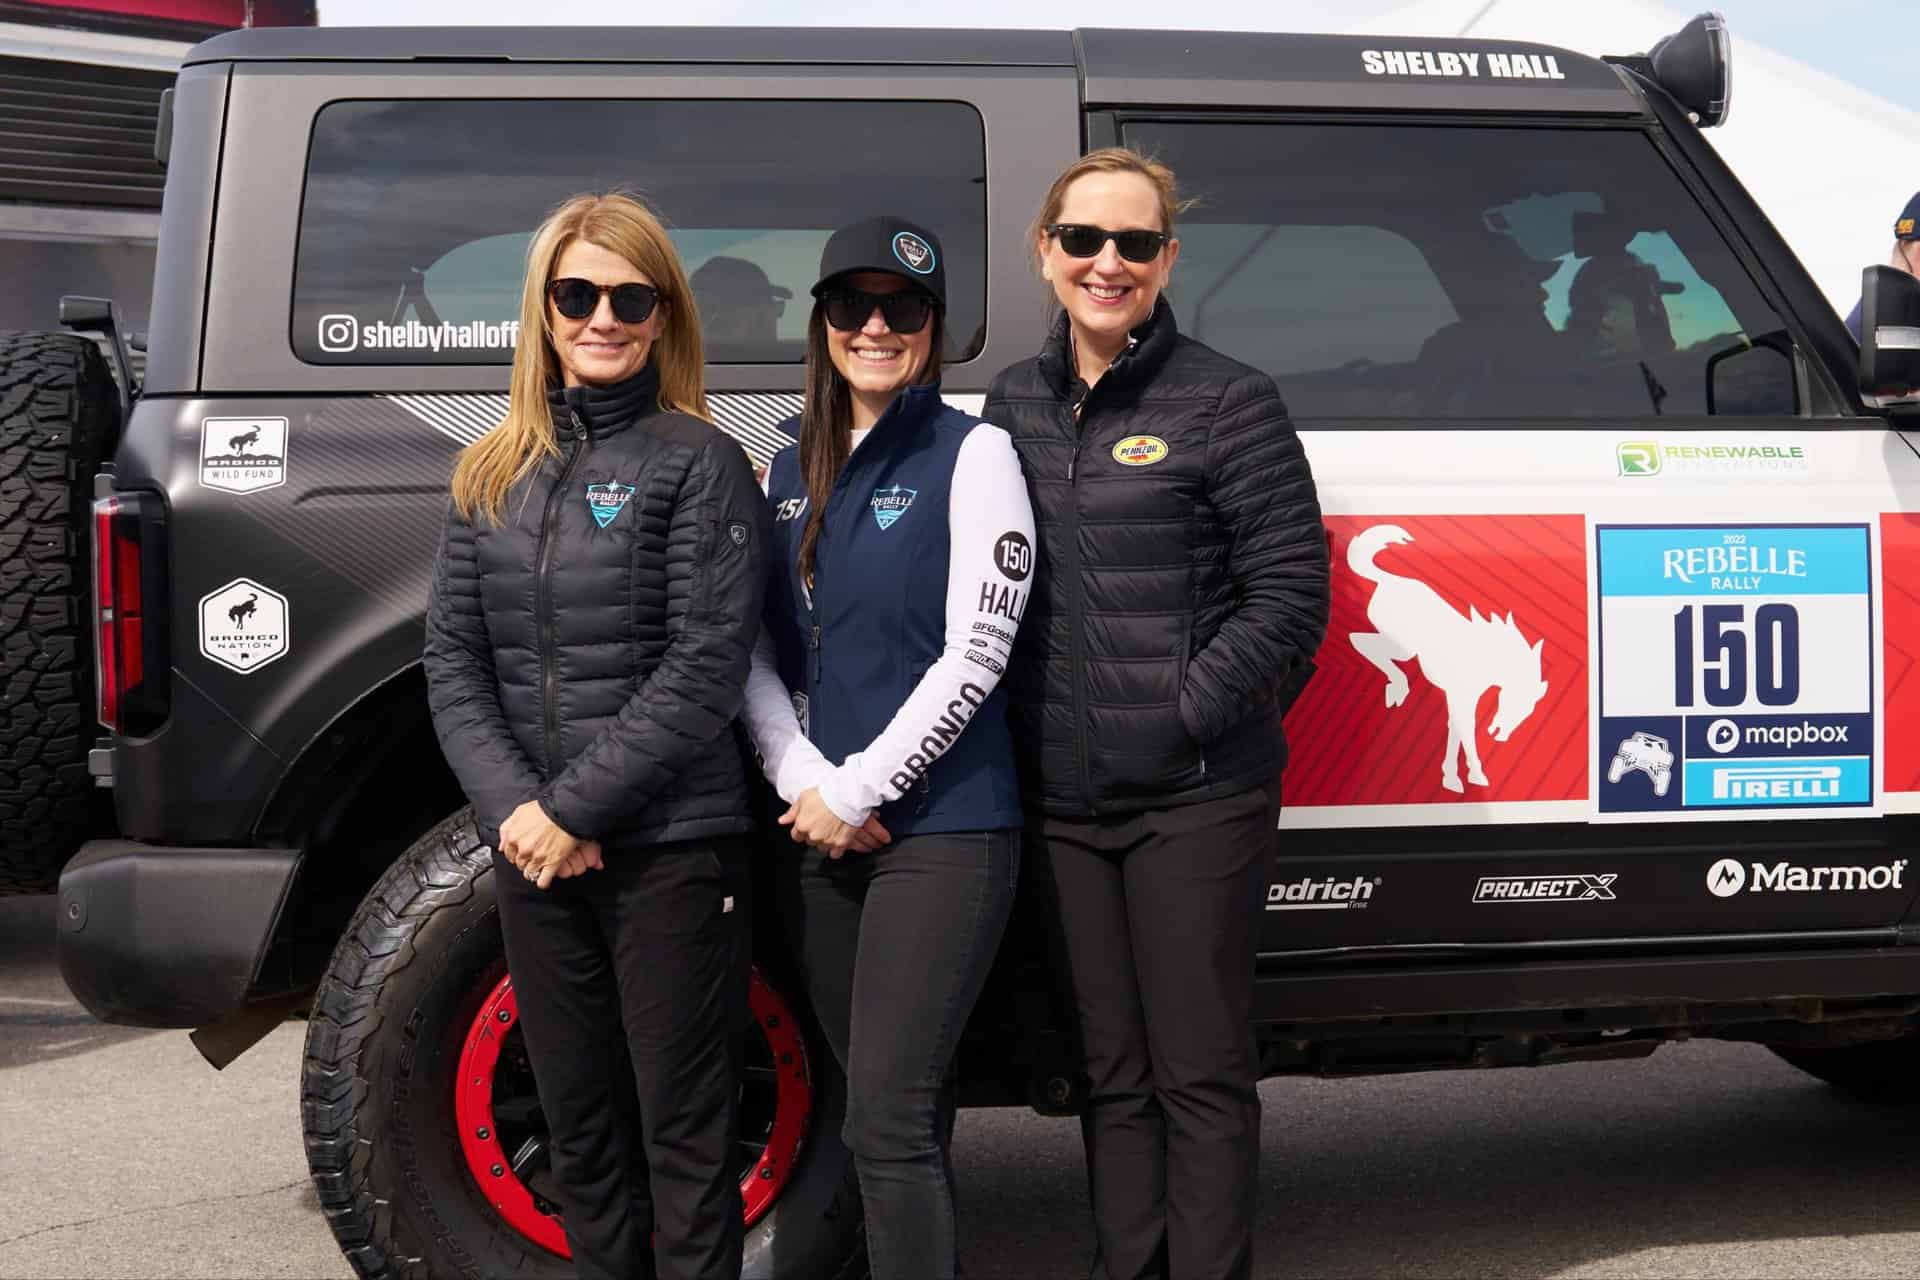 Pictured left to right, Emily Miller, founder of the Rebelle Rally, Shelby Hall, off-road competitor and winner of the Rebelle Rally, and Bree Sandlin, Vice President, Shell Lubricants North America Marketing.